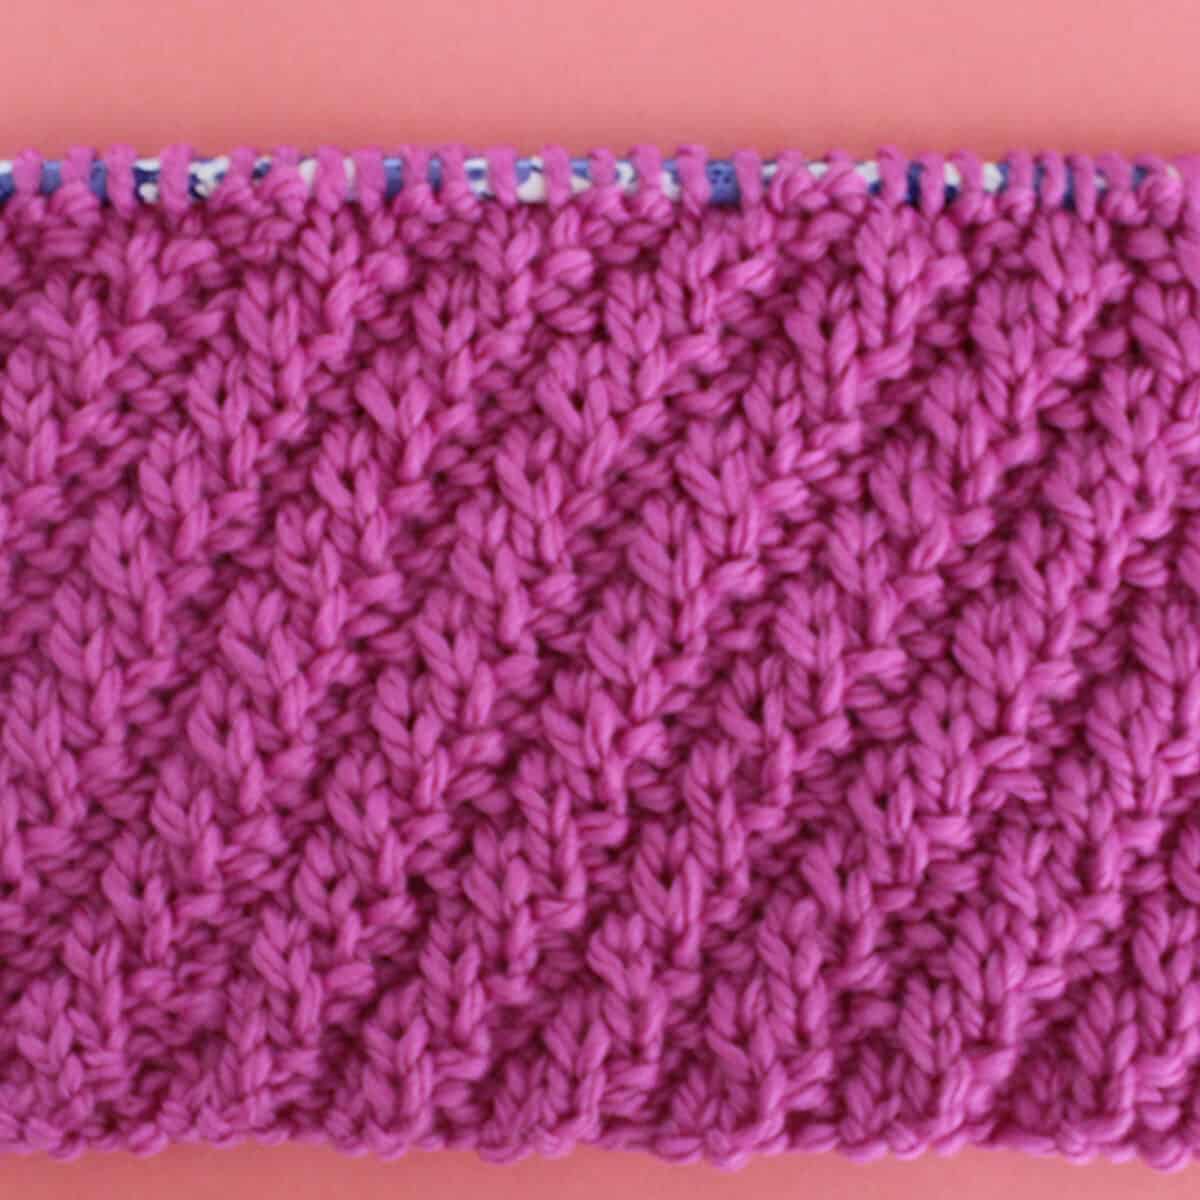 Diagonal Rib Cable Knit Stitch Pattern texture in pink color yarn on knitting needle.